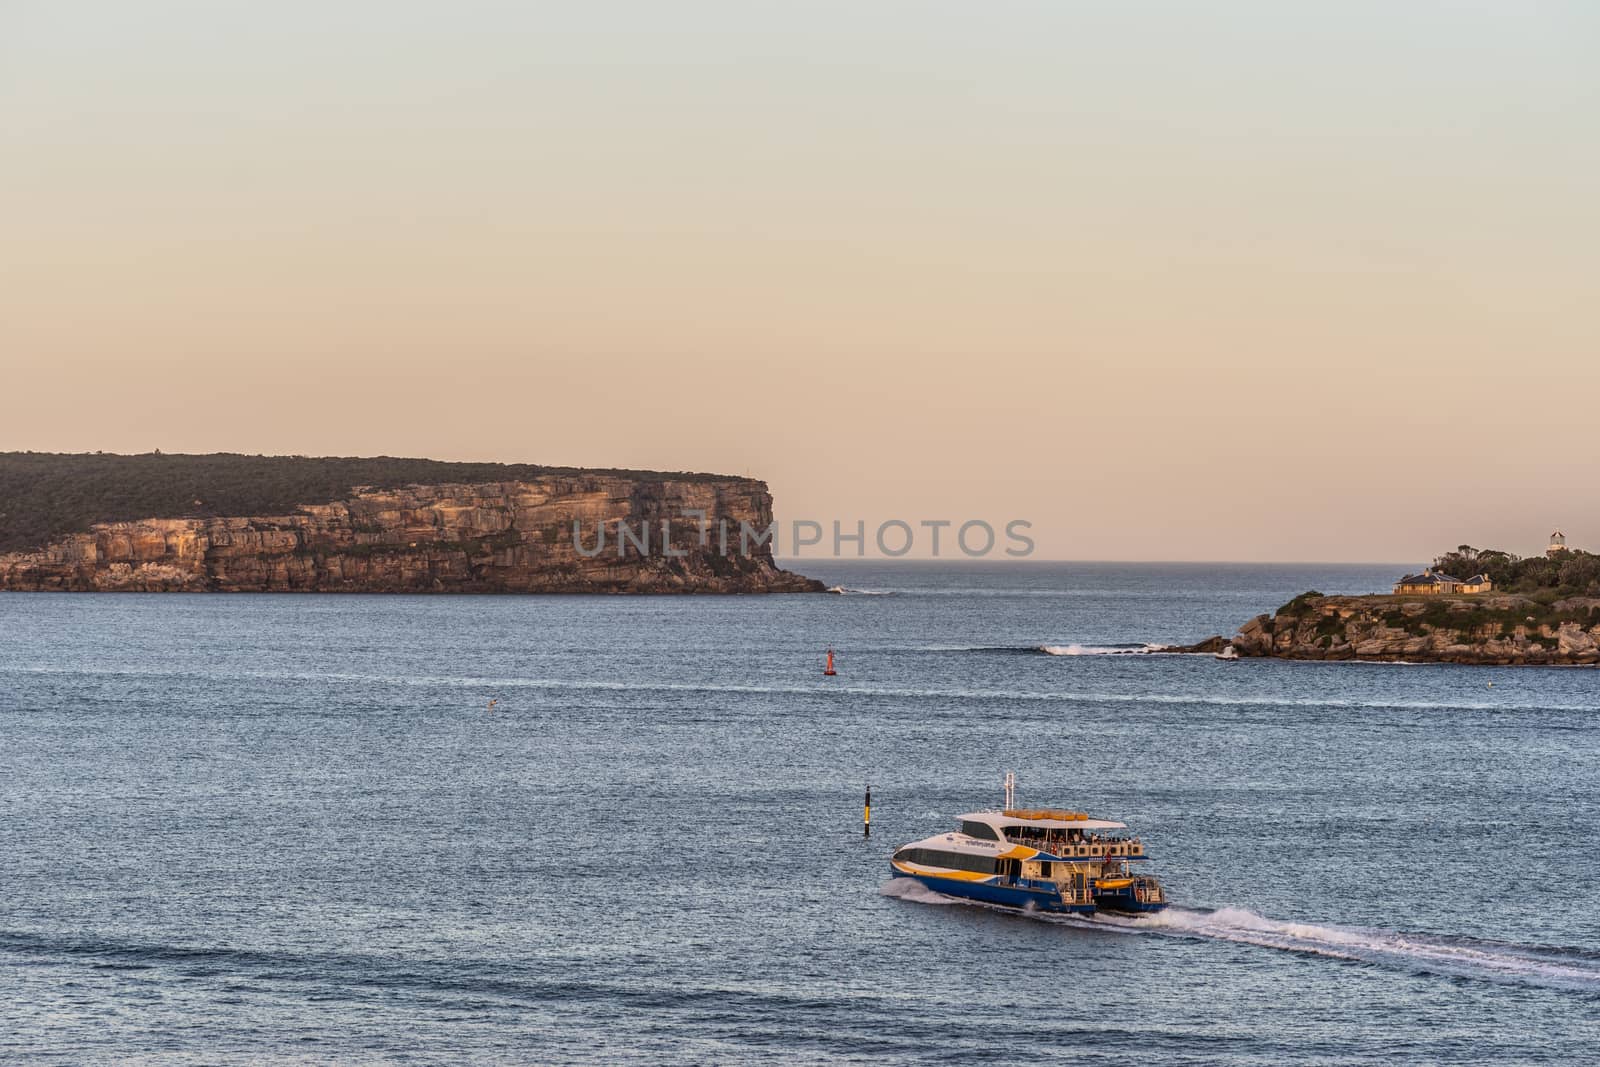 Sydney, Australia - February 12, 2019: North and South Head cliffs at gate between Tasman Sea and Sydney Bay during sunset. Cloudless pale sky. Gray water. Warm brown rocks and a yellow ferry boat.